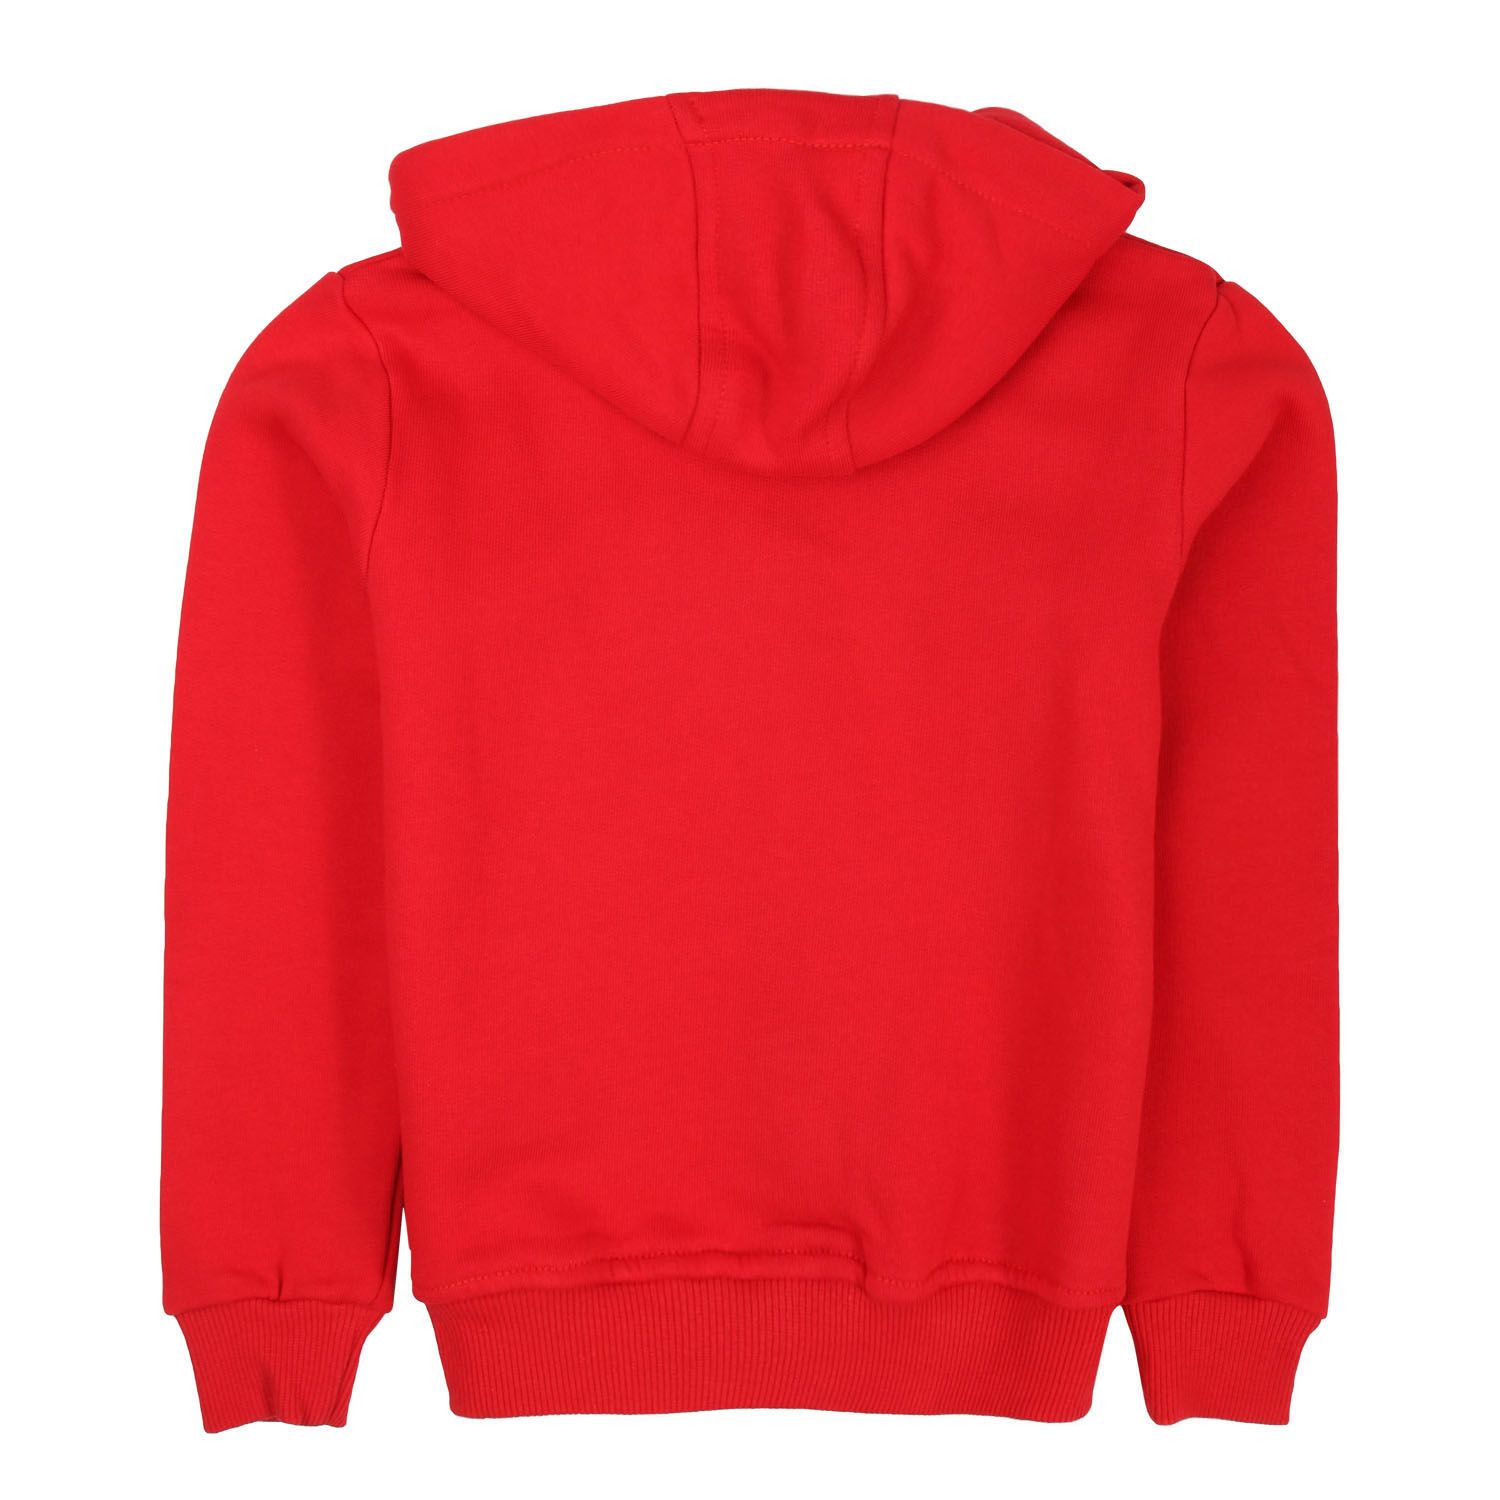 Red Manuel Ritz sweatshirt -Details sweatshirt with hood and regulator drawstring, long sleeves with elastic cuffs, completely red, front with black fabric with white printed text, visible logo, central zip closure -Hand wash